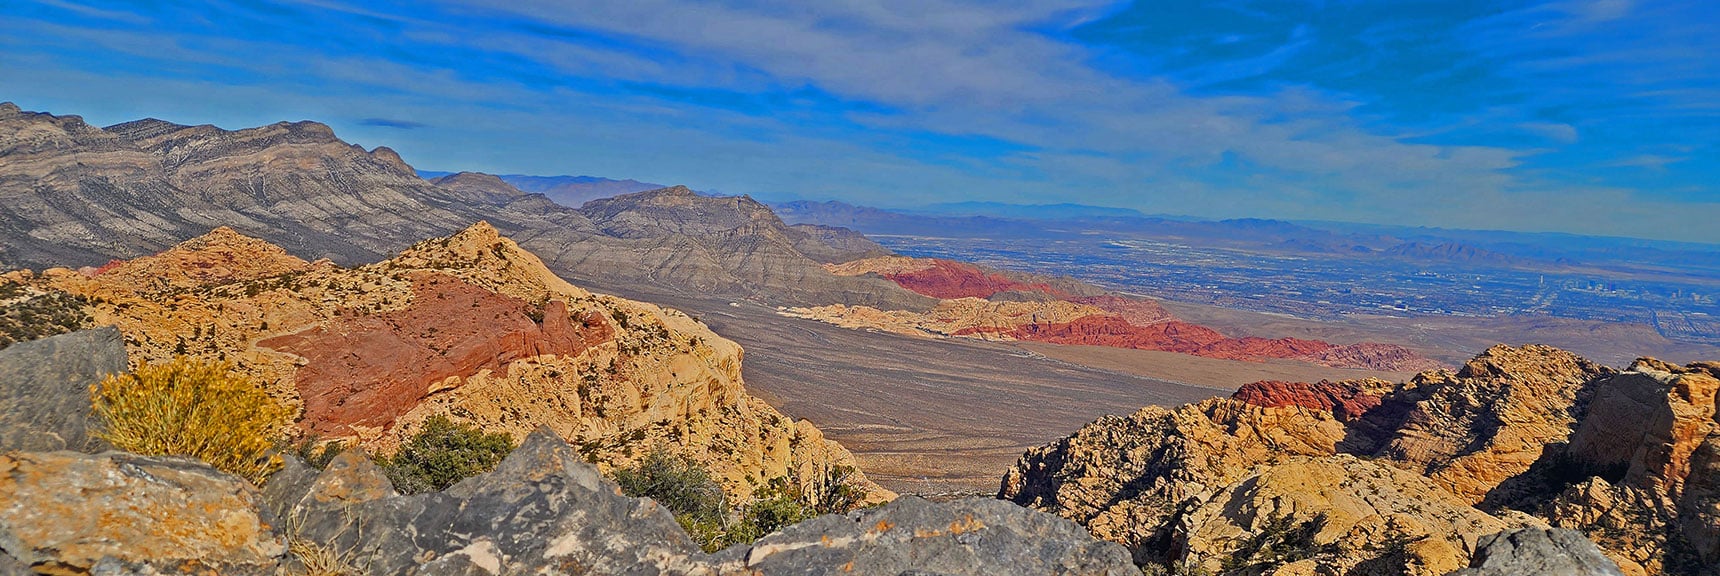 Las Vegas Valley Coming Into View Beyond the Calico Hills in Red Rock Canyon | North Upper Crest Ridgeline | Rainbow Mountain Wilderness, Nevada